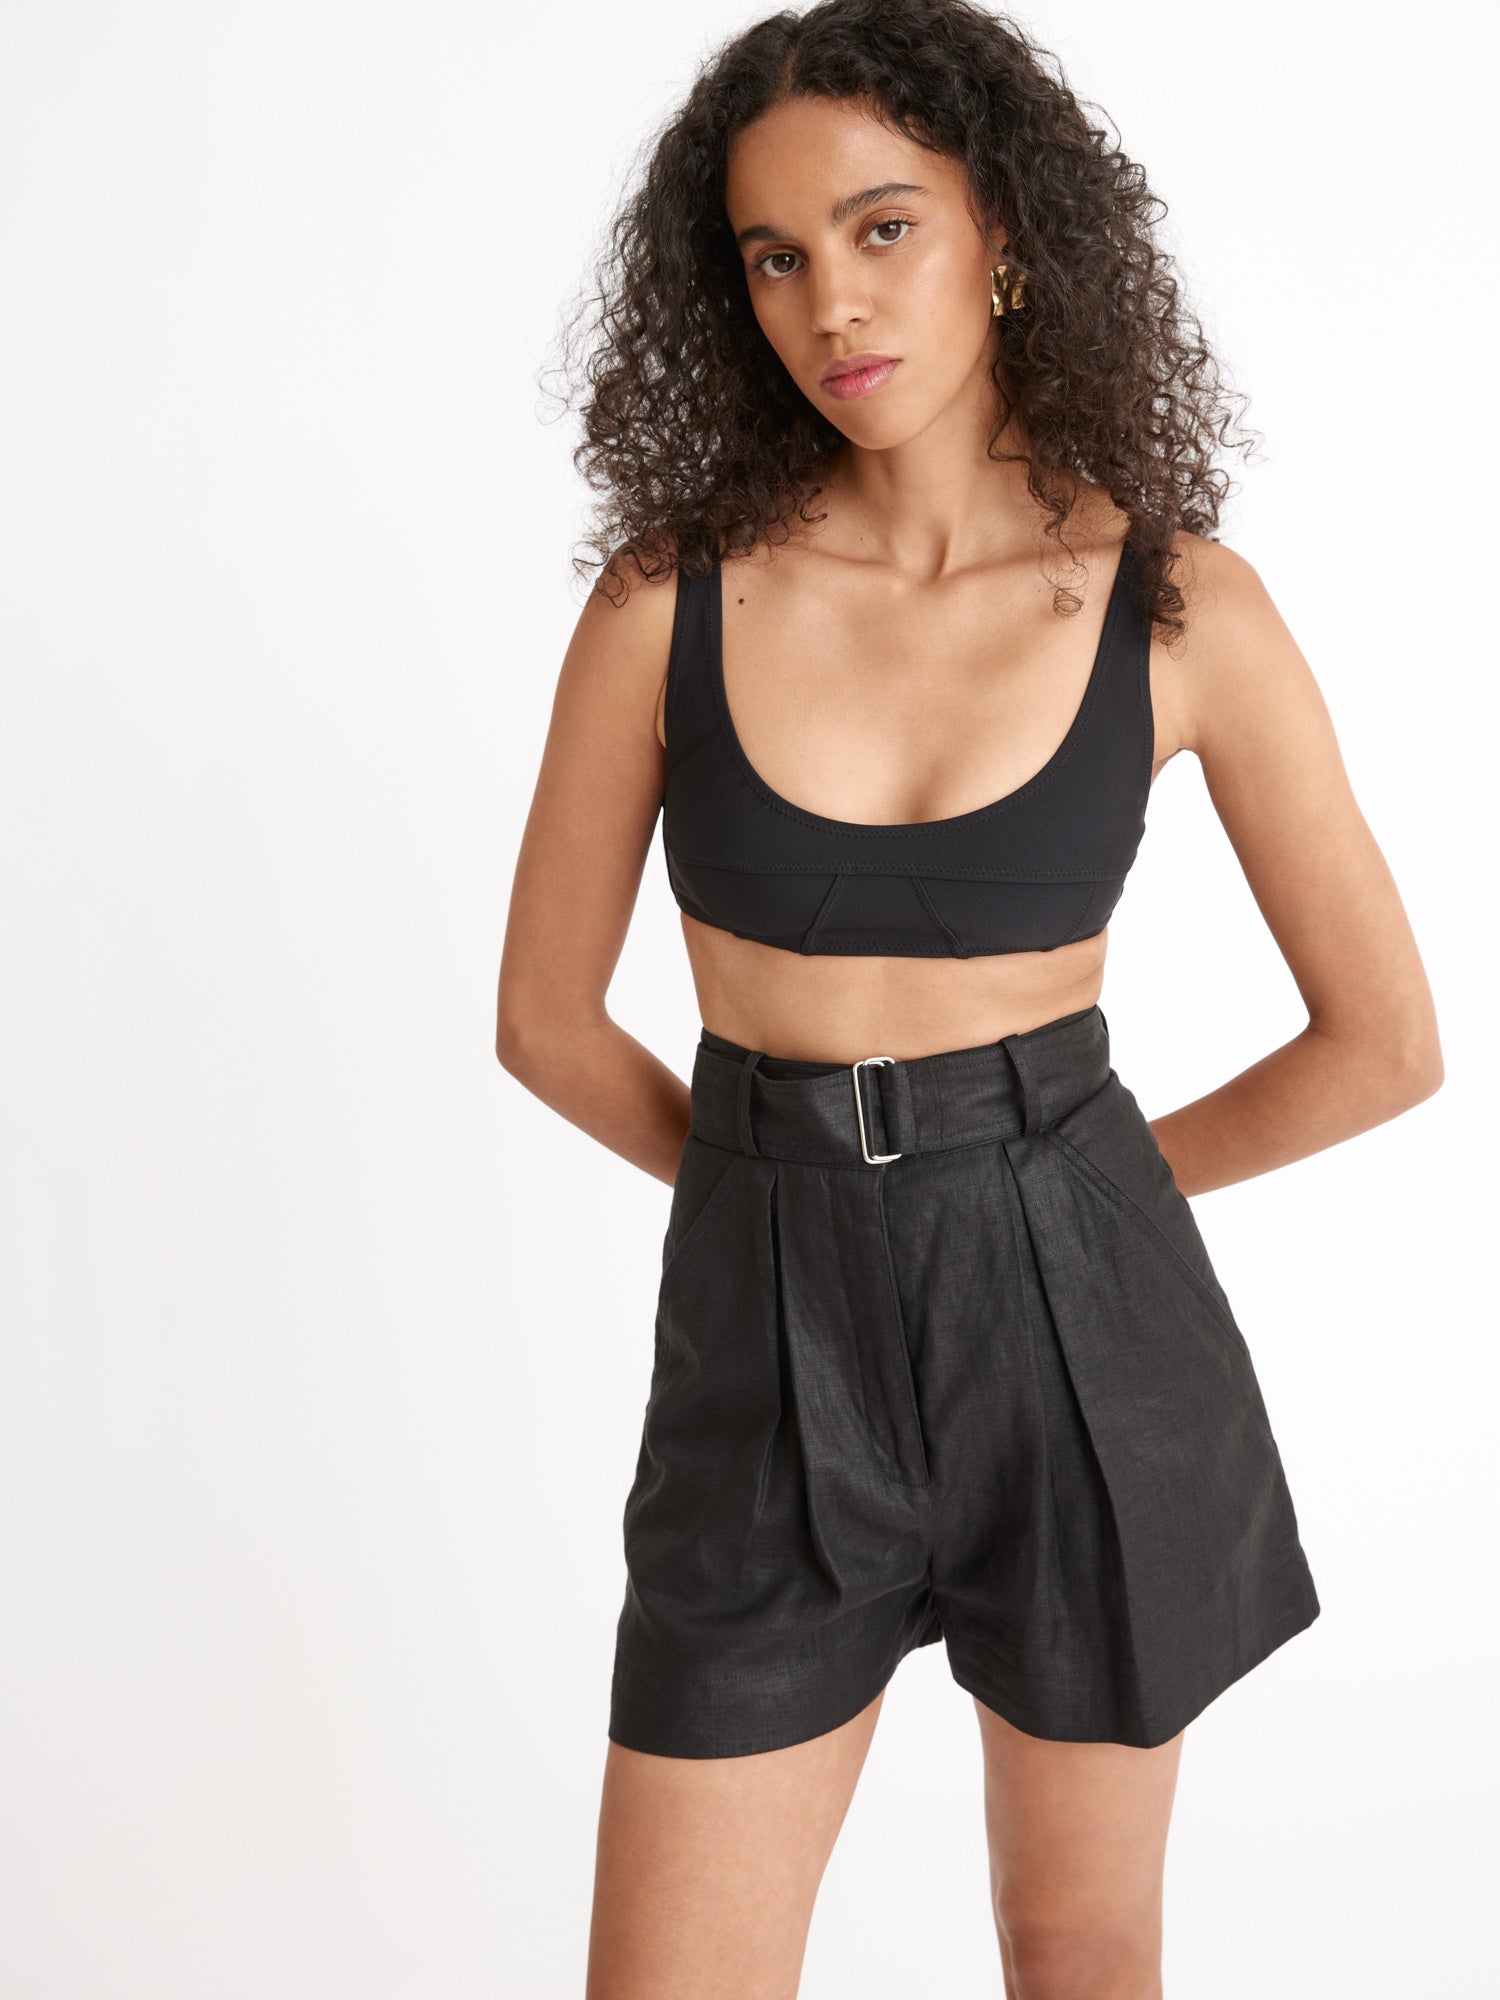 Frankfort-Black. Black high-waisted linen shorts with bow tie